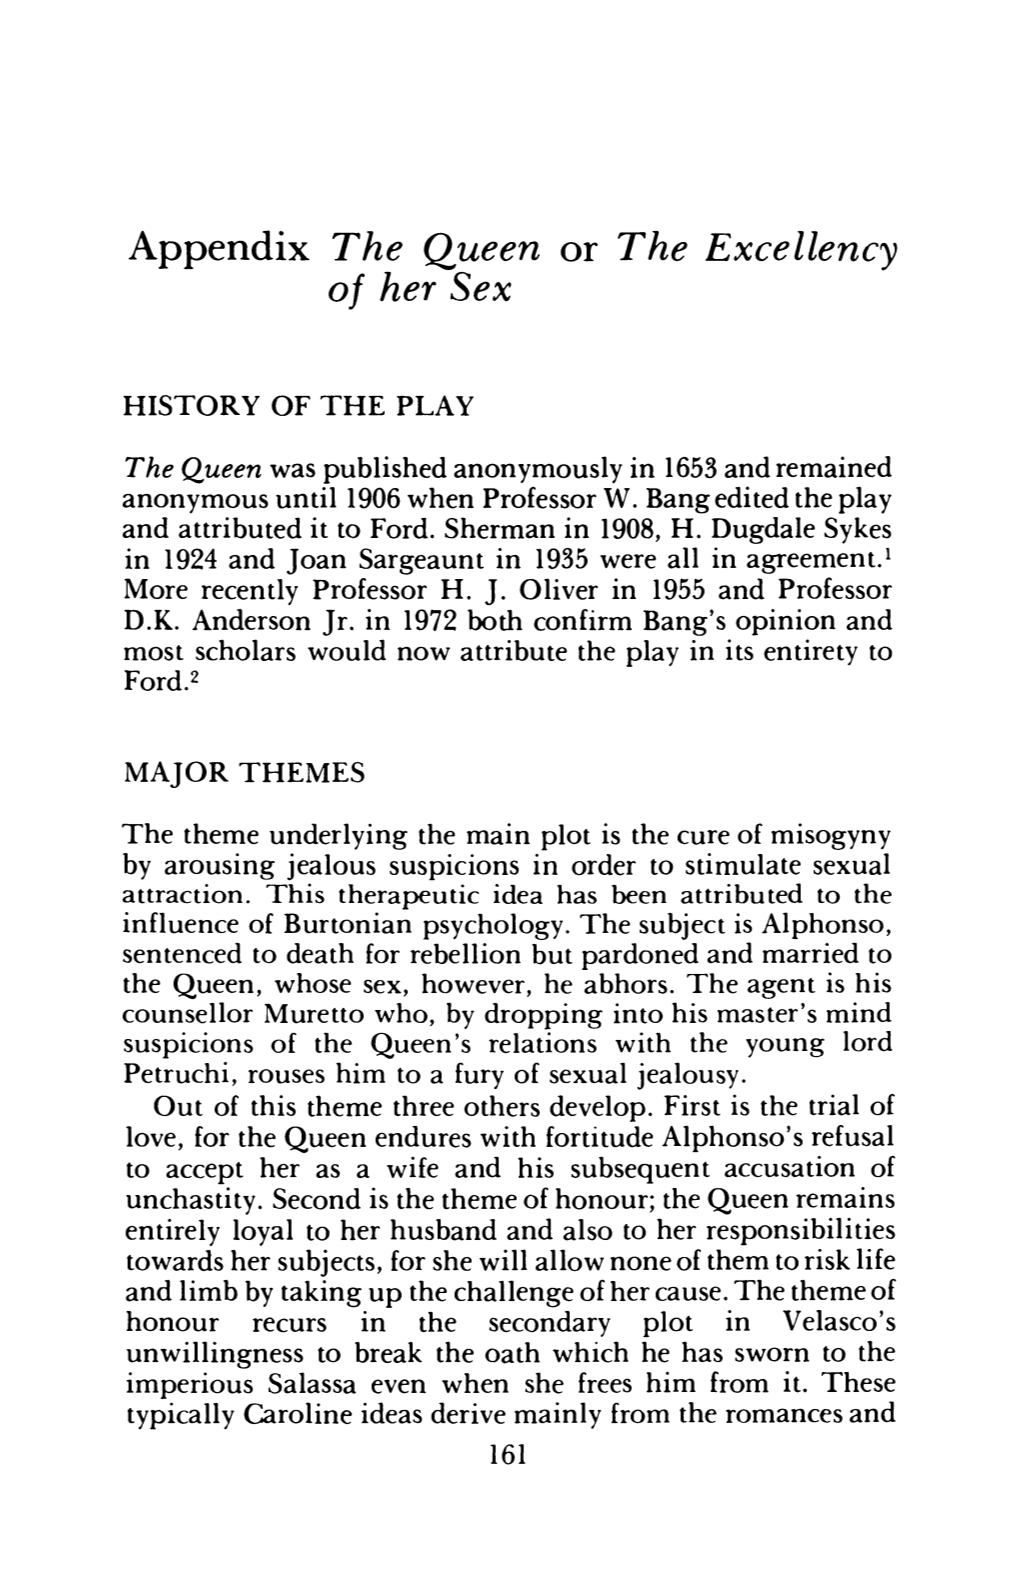 Appendix the Queen Or the Excellency of Her Sex